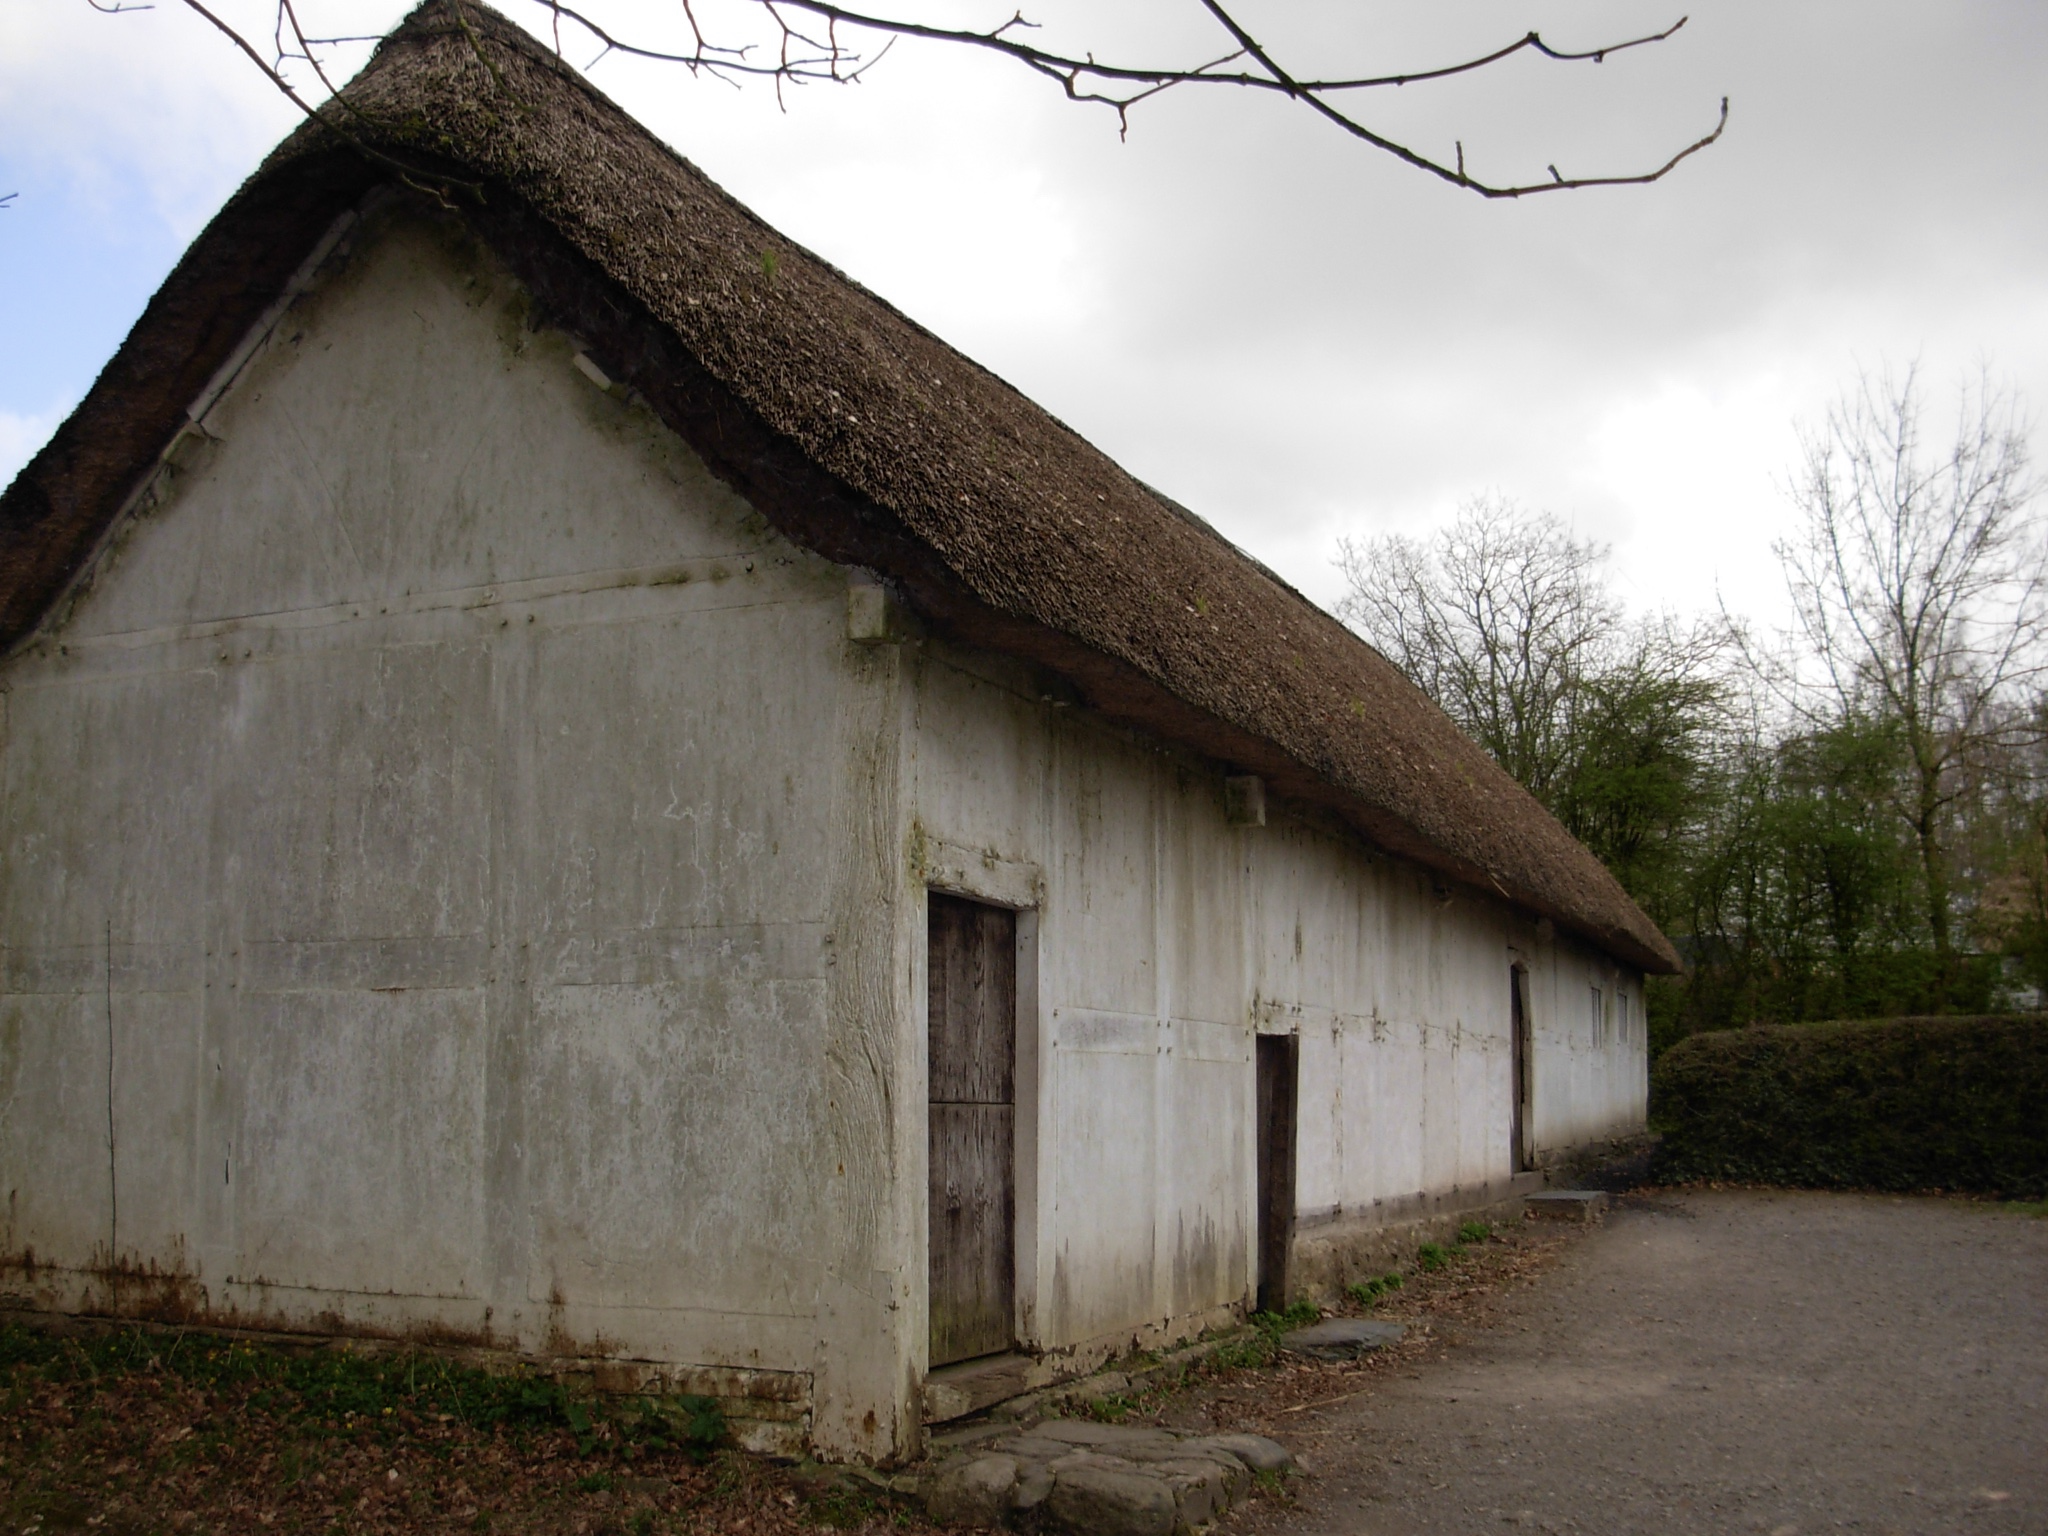 Reconstruction of a typical hall house